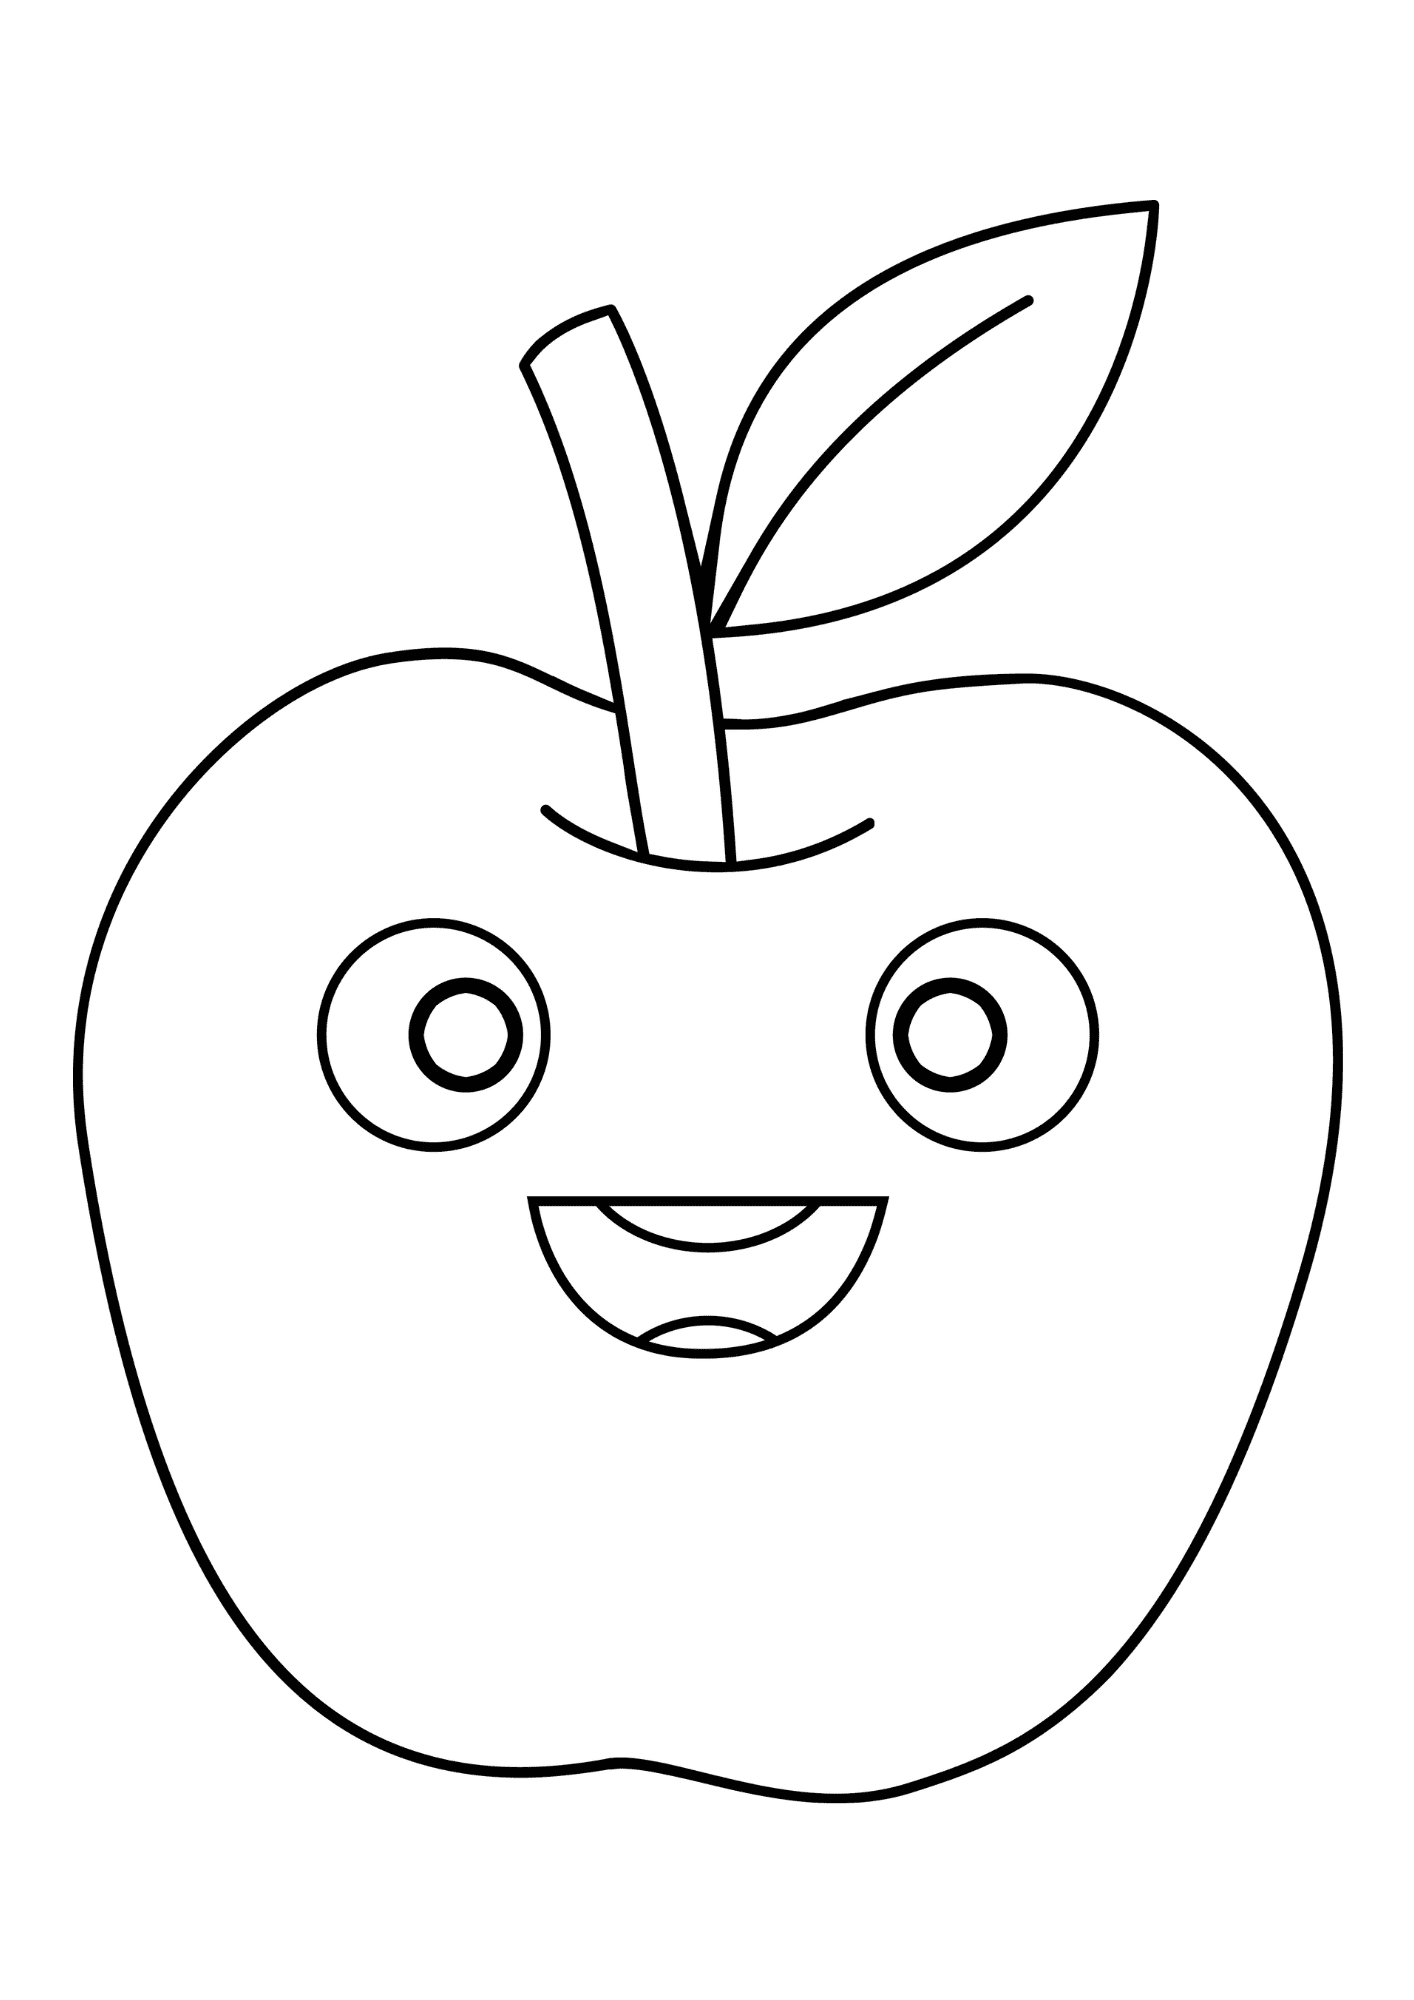 Cute Apple Free Coloring Pages